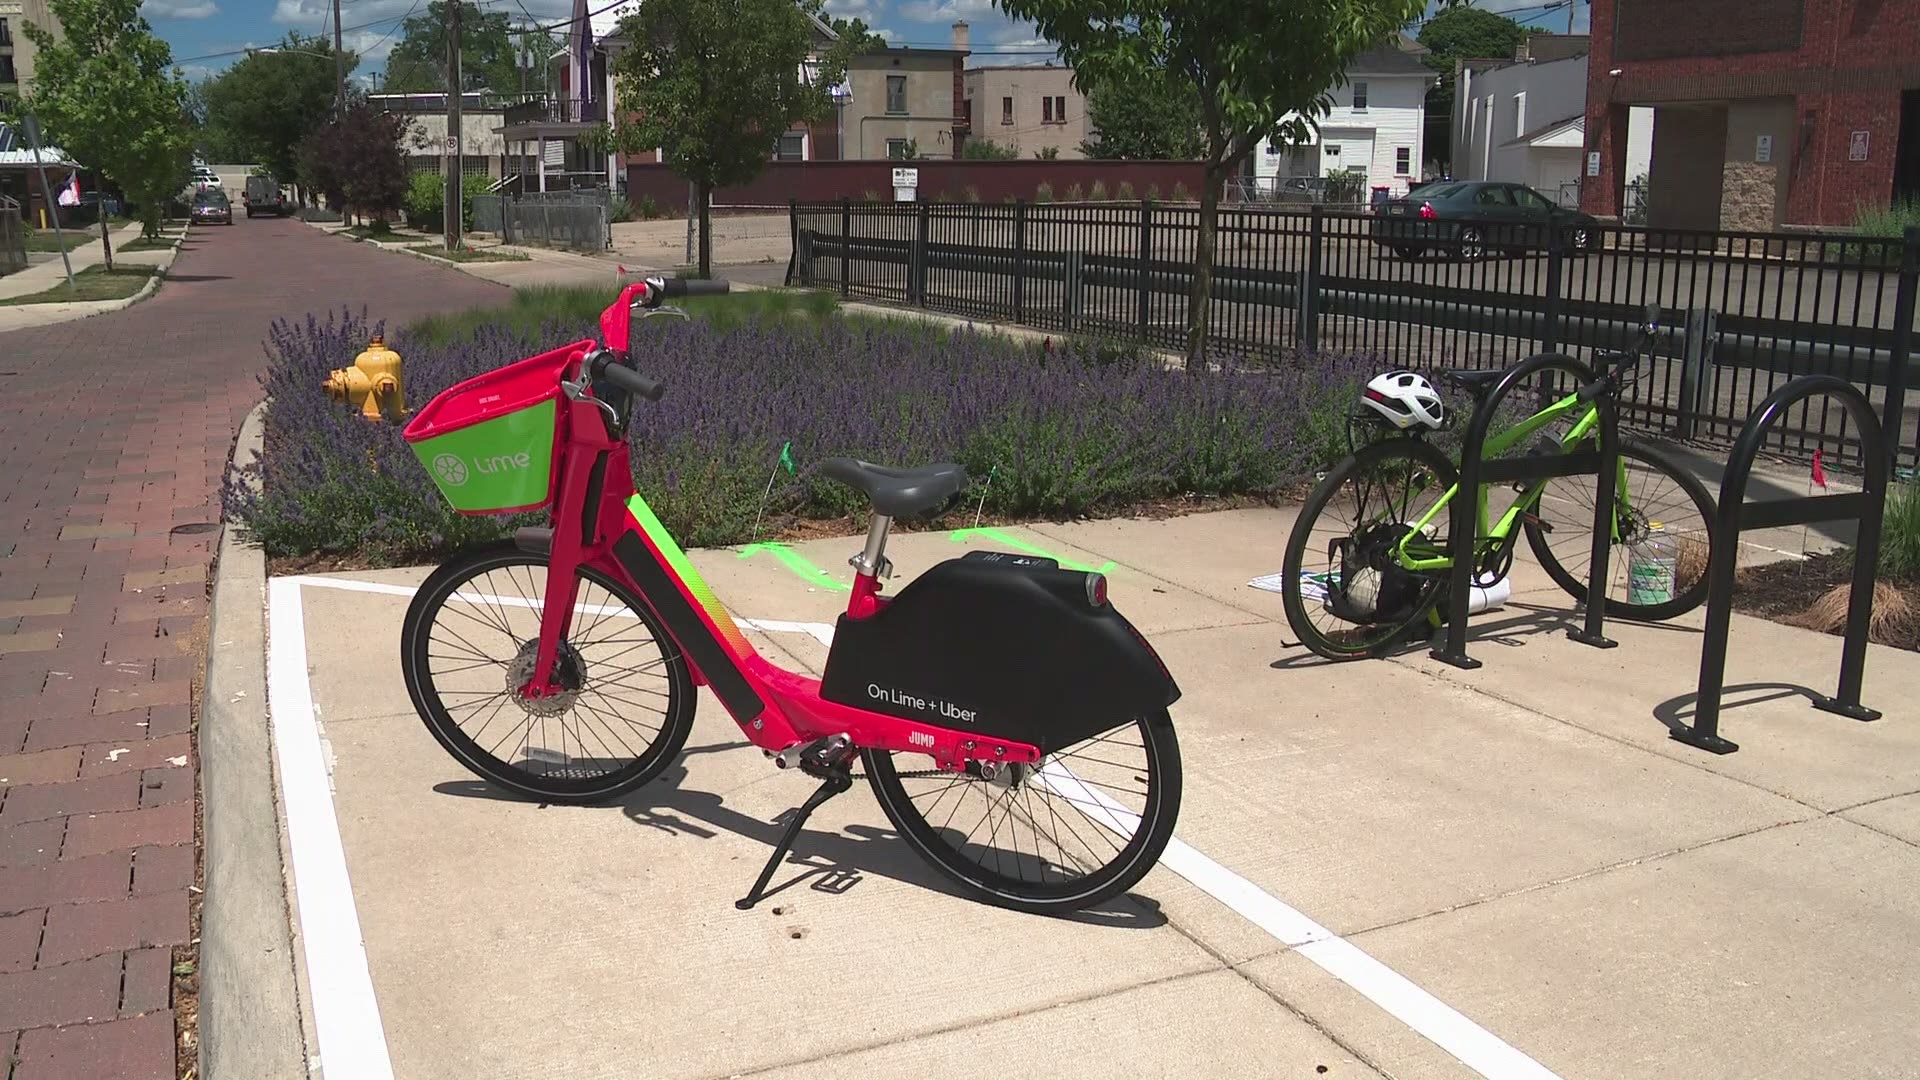 Through a partnership with Lime, Grand Rapids is going to have about 750 rentable bikes and scooters on city streets.